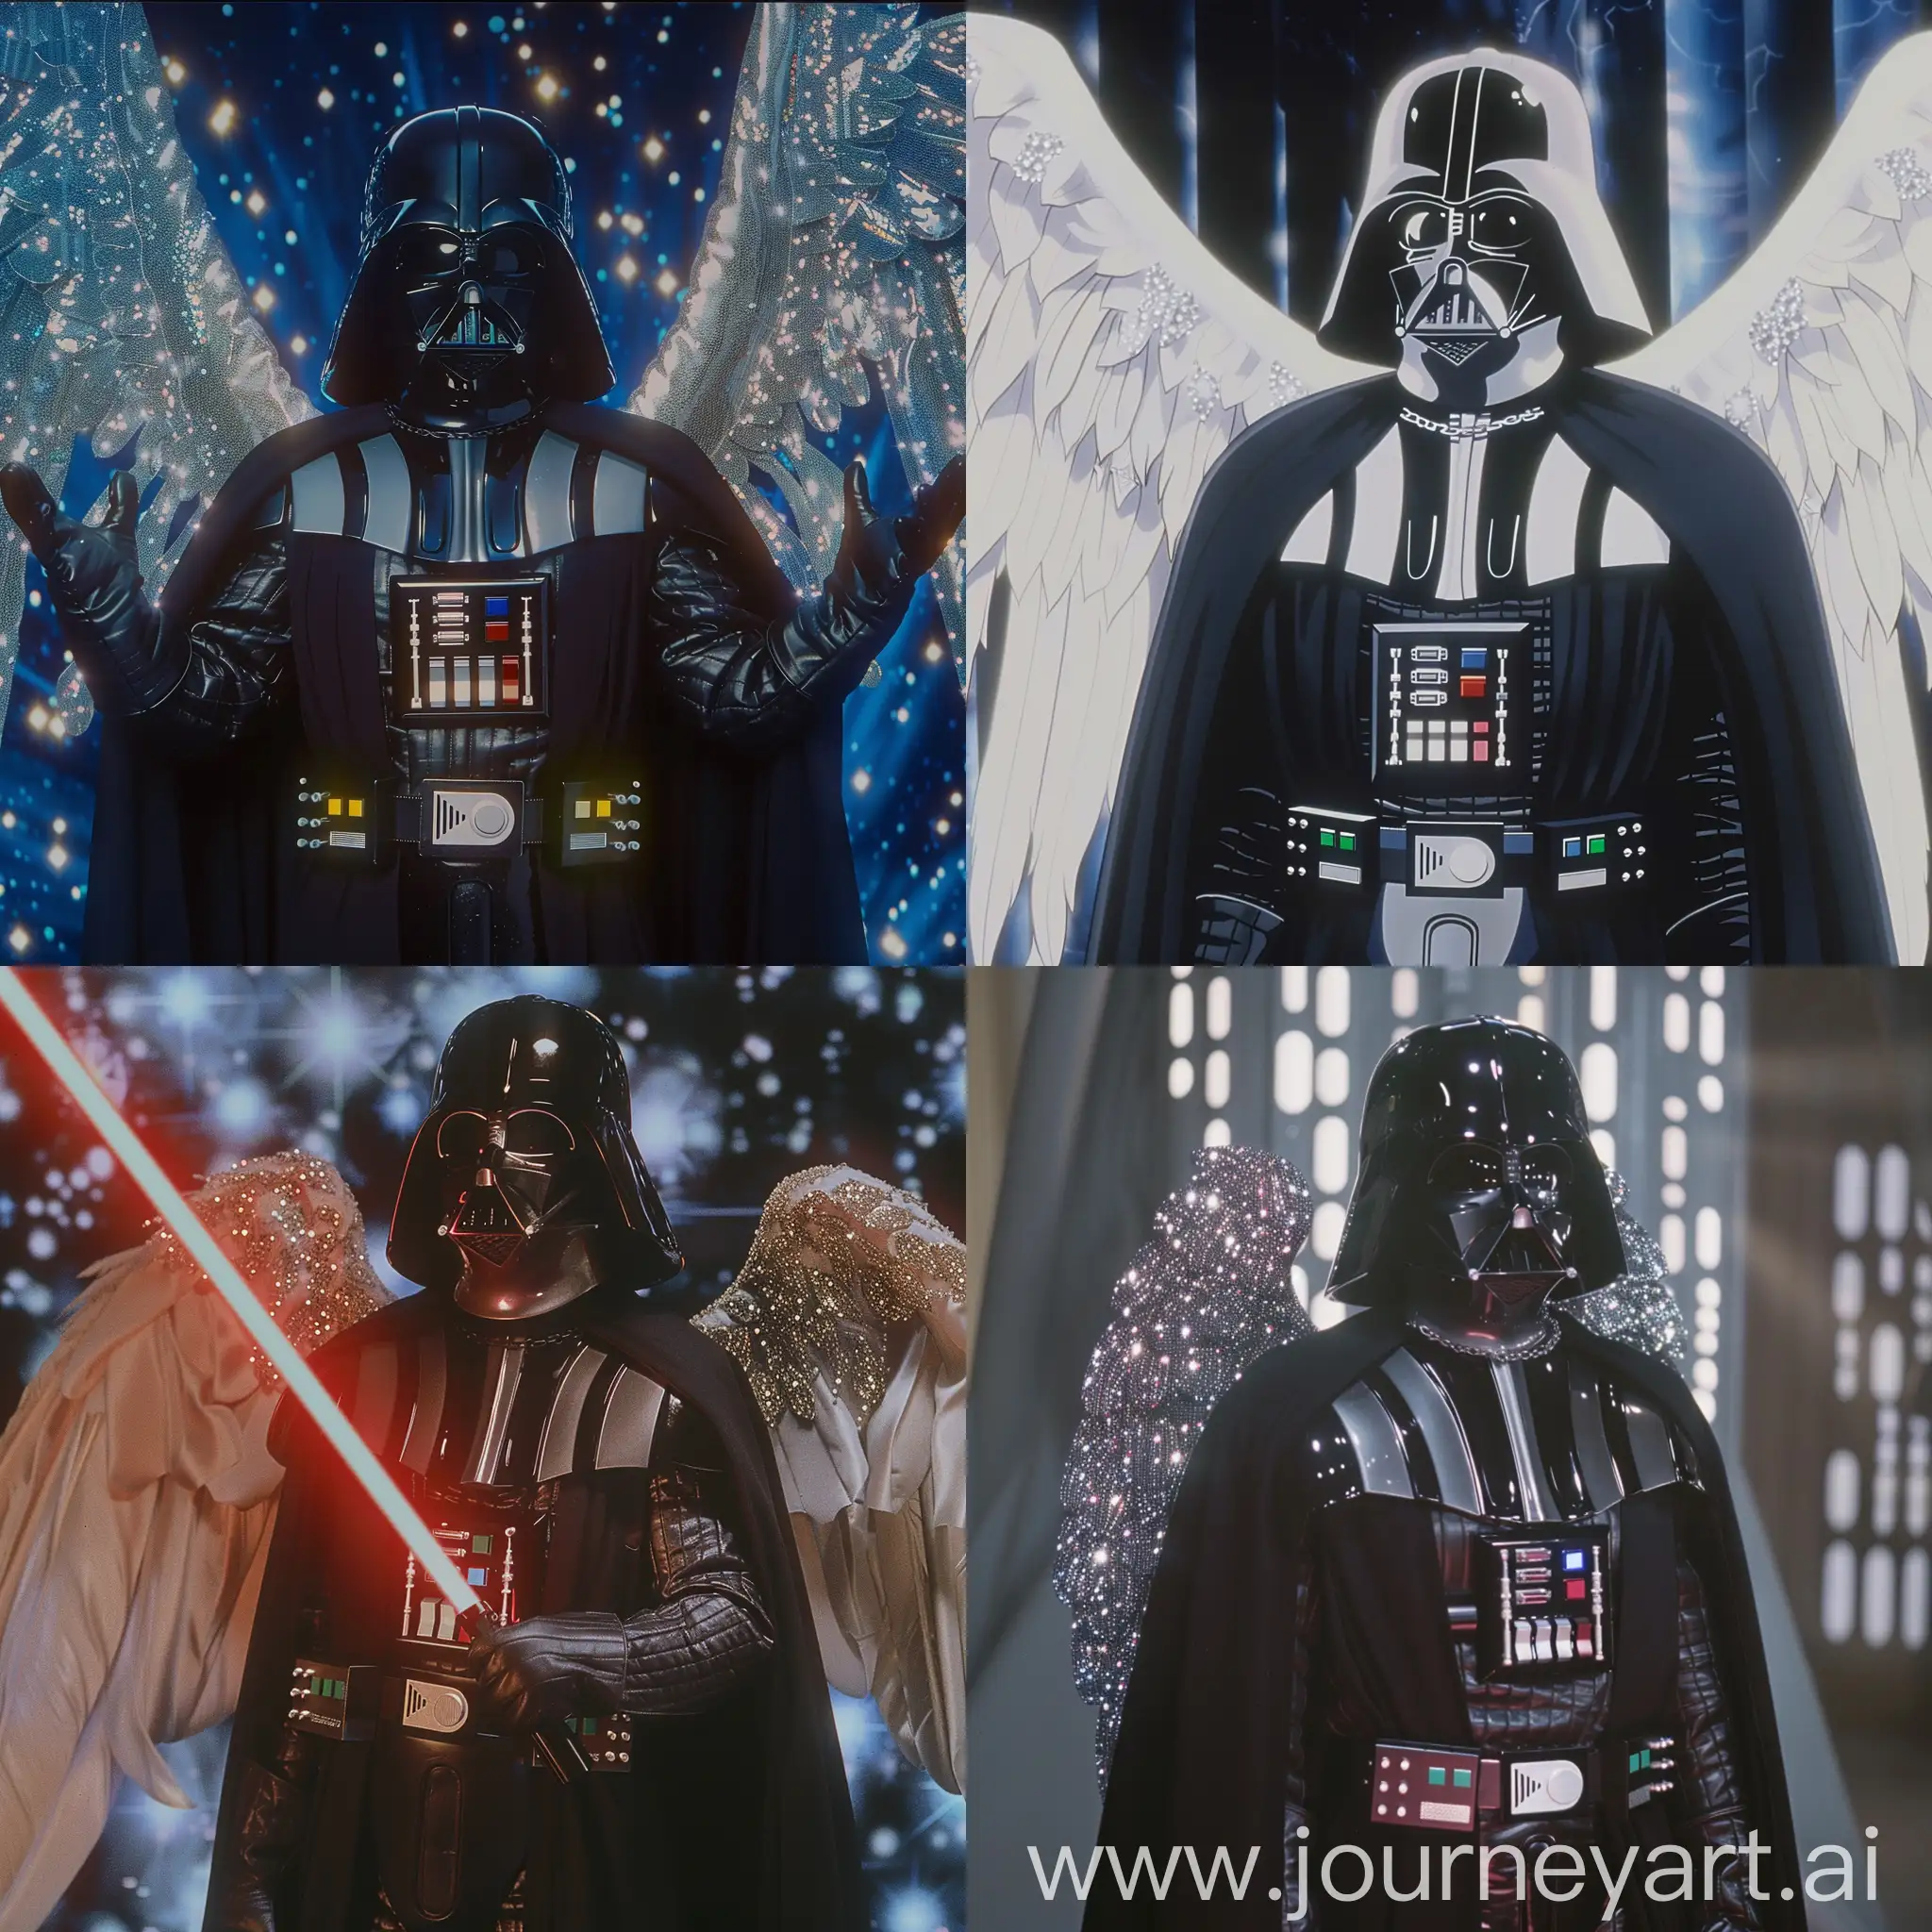 Darth Vader  in anime genre film, dvd screenshot from anime film, angel costume with diamond embroidery and 80s anime film composition